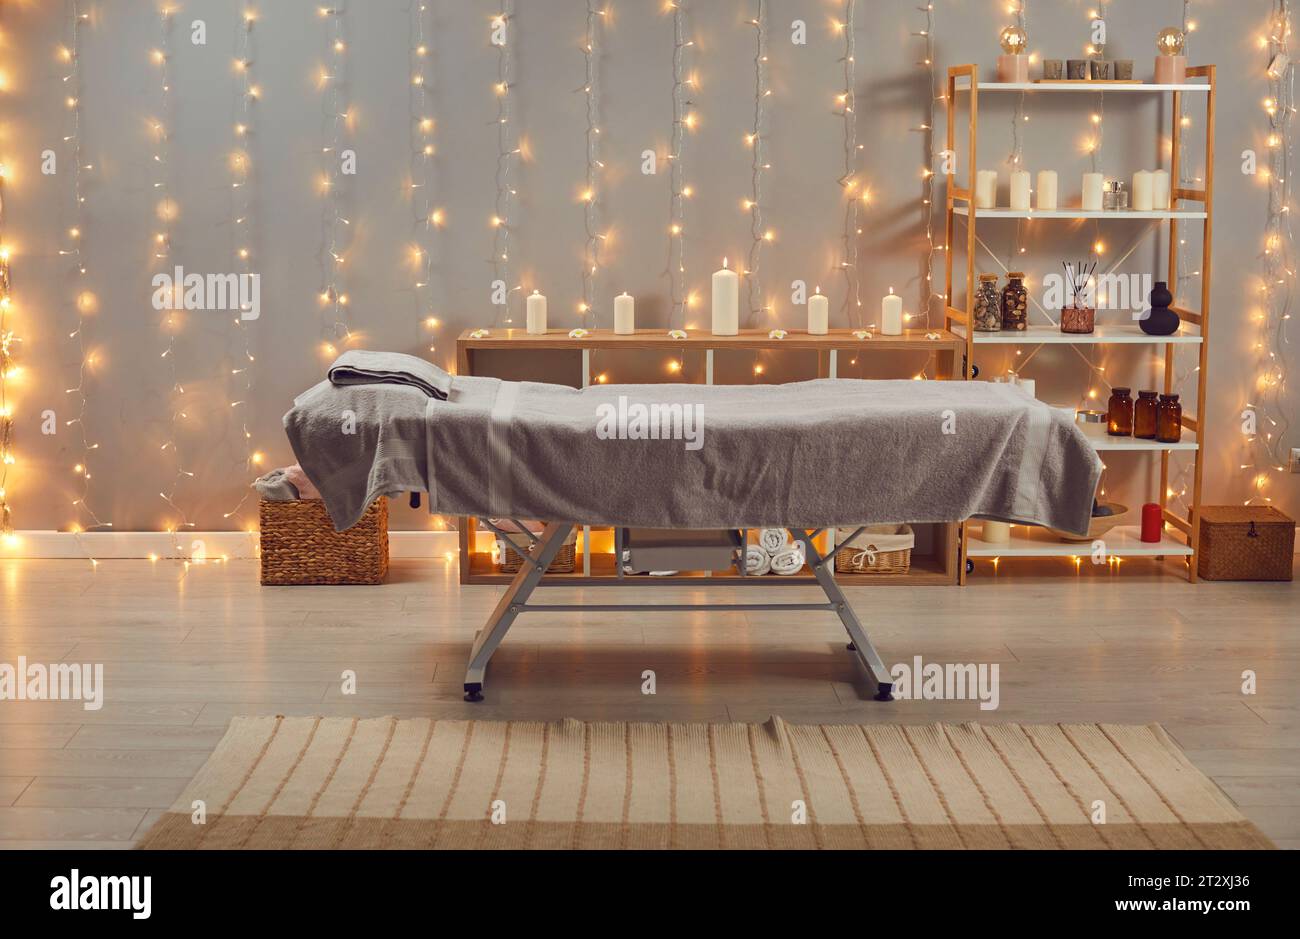 Spa salon interior with massage bed, burning candles and lights Stock Photo